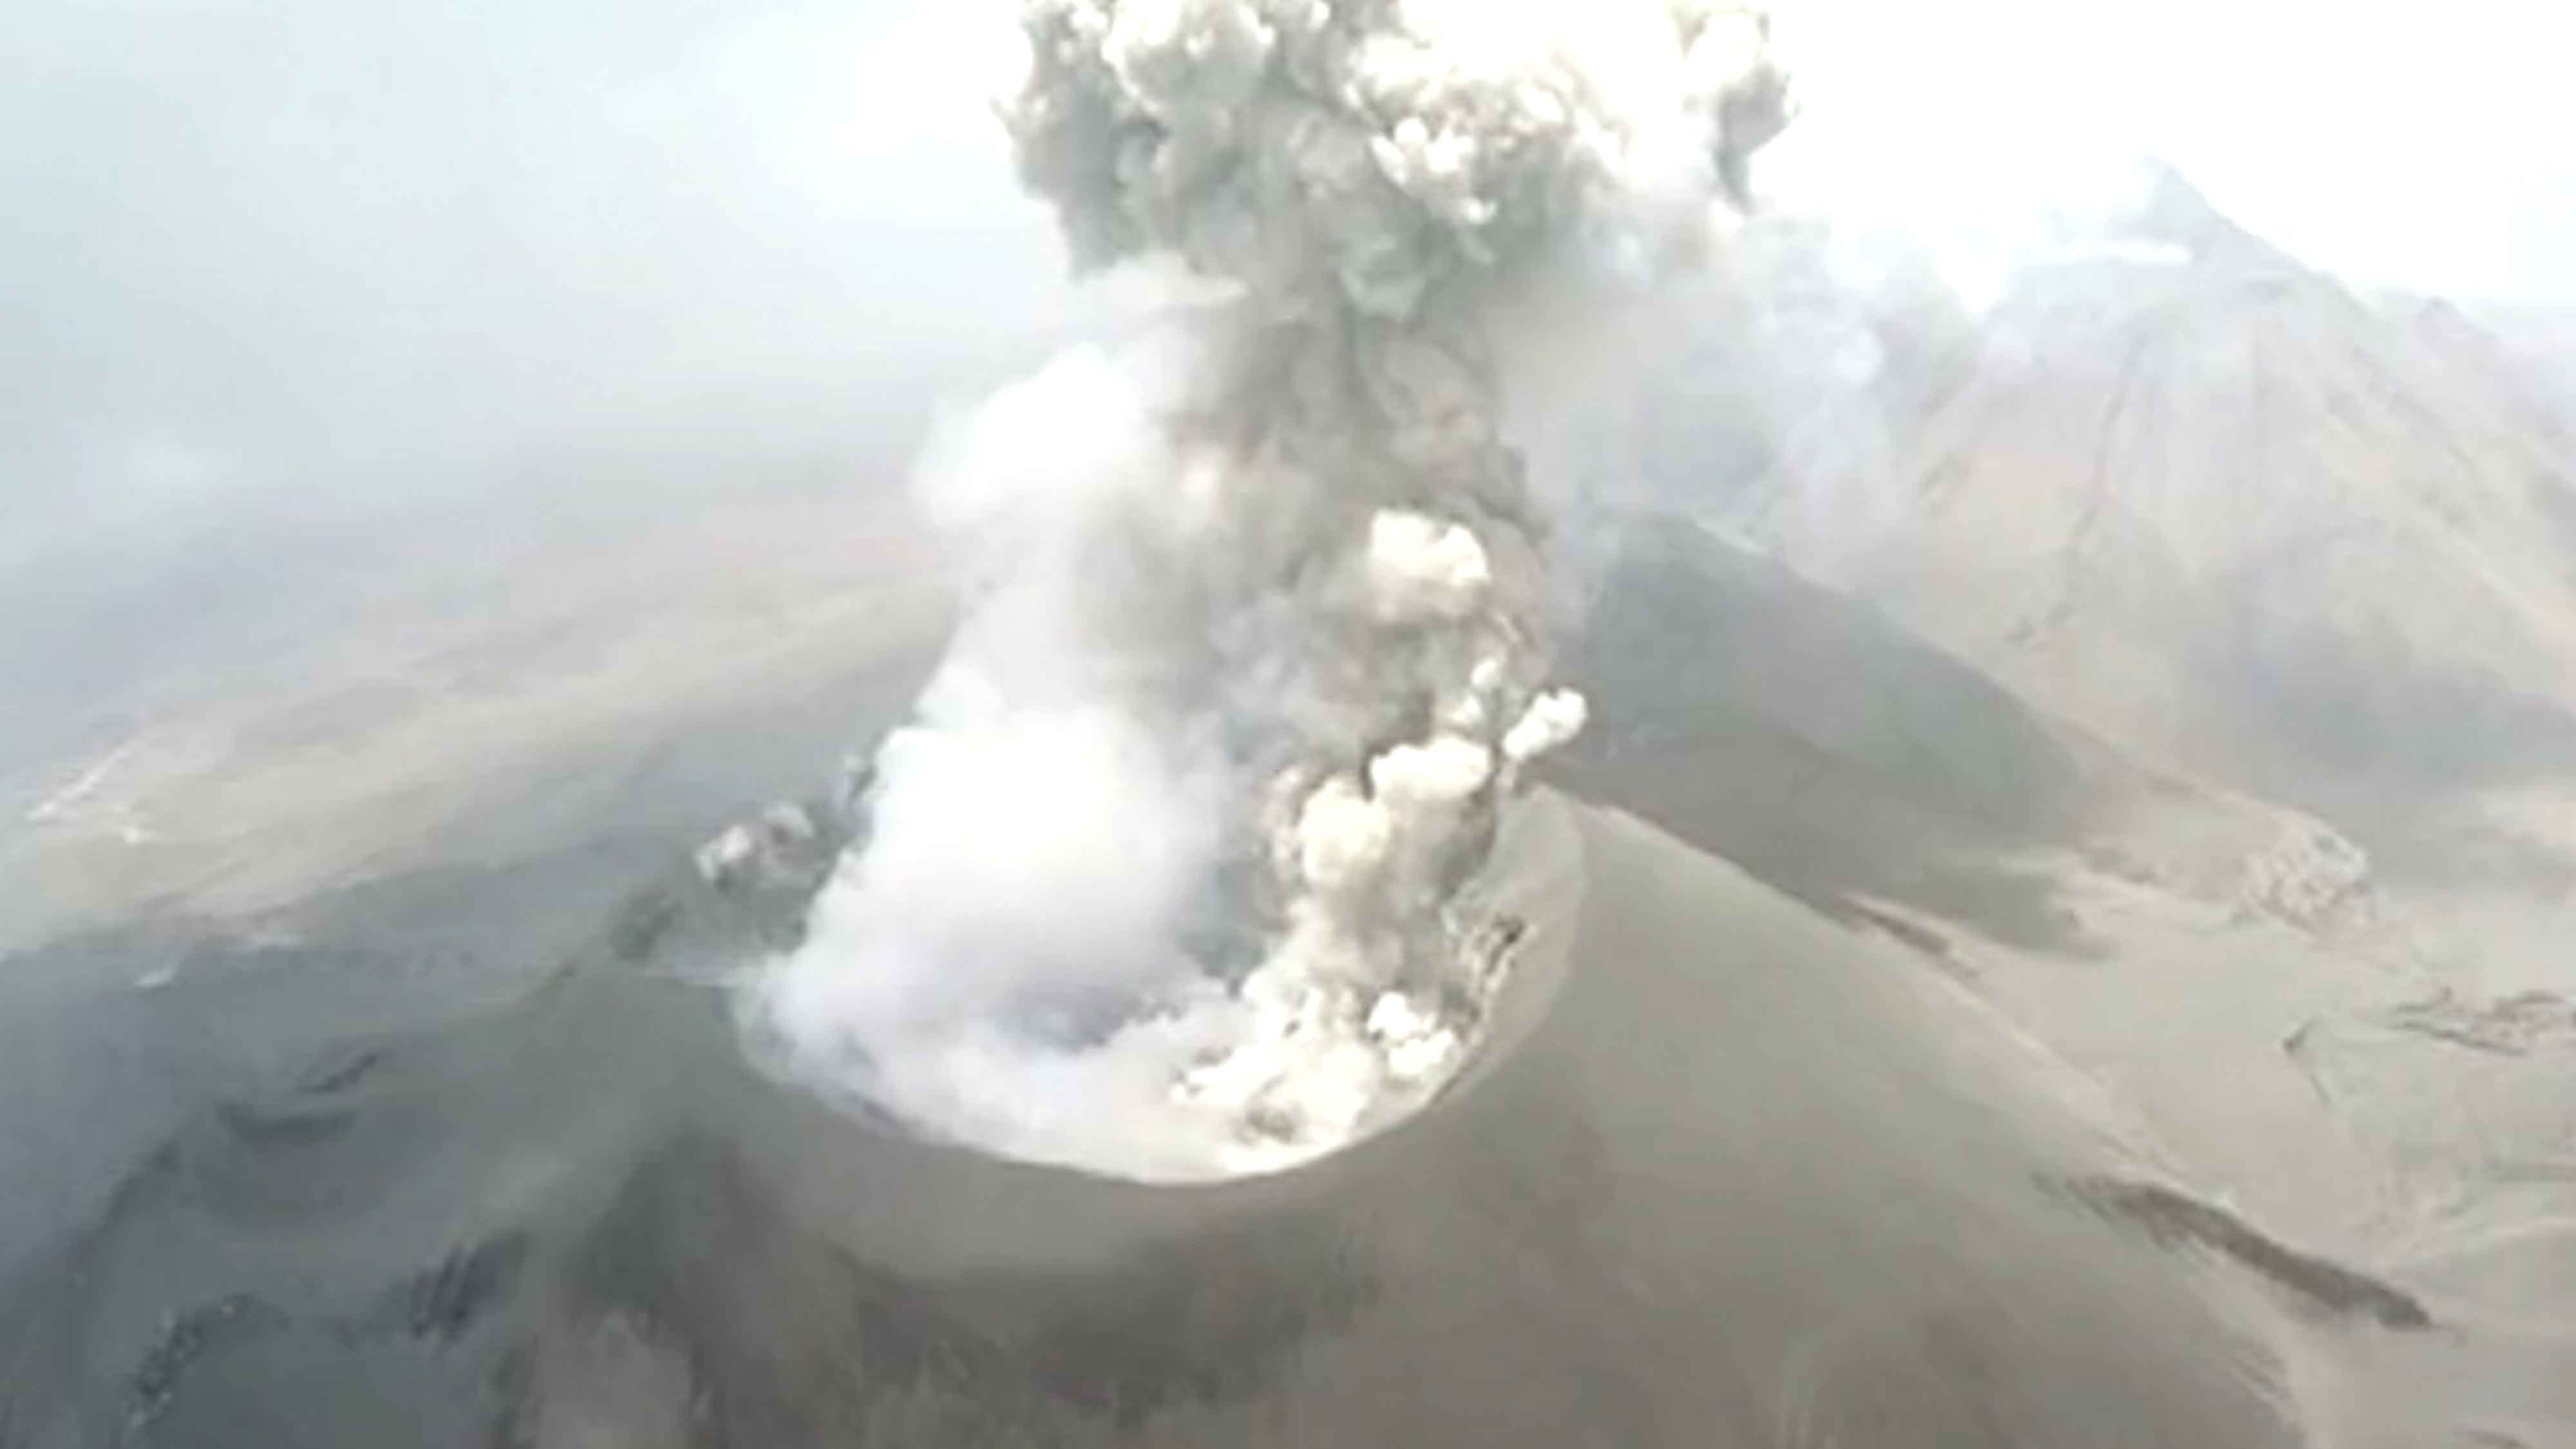 Scientists used a drone to capture dramatic video of Peru's Sabancaya